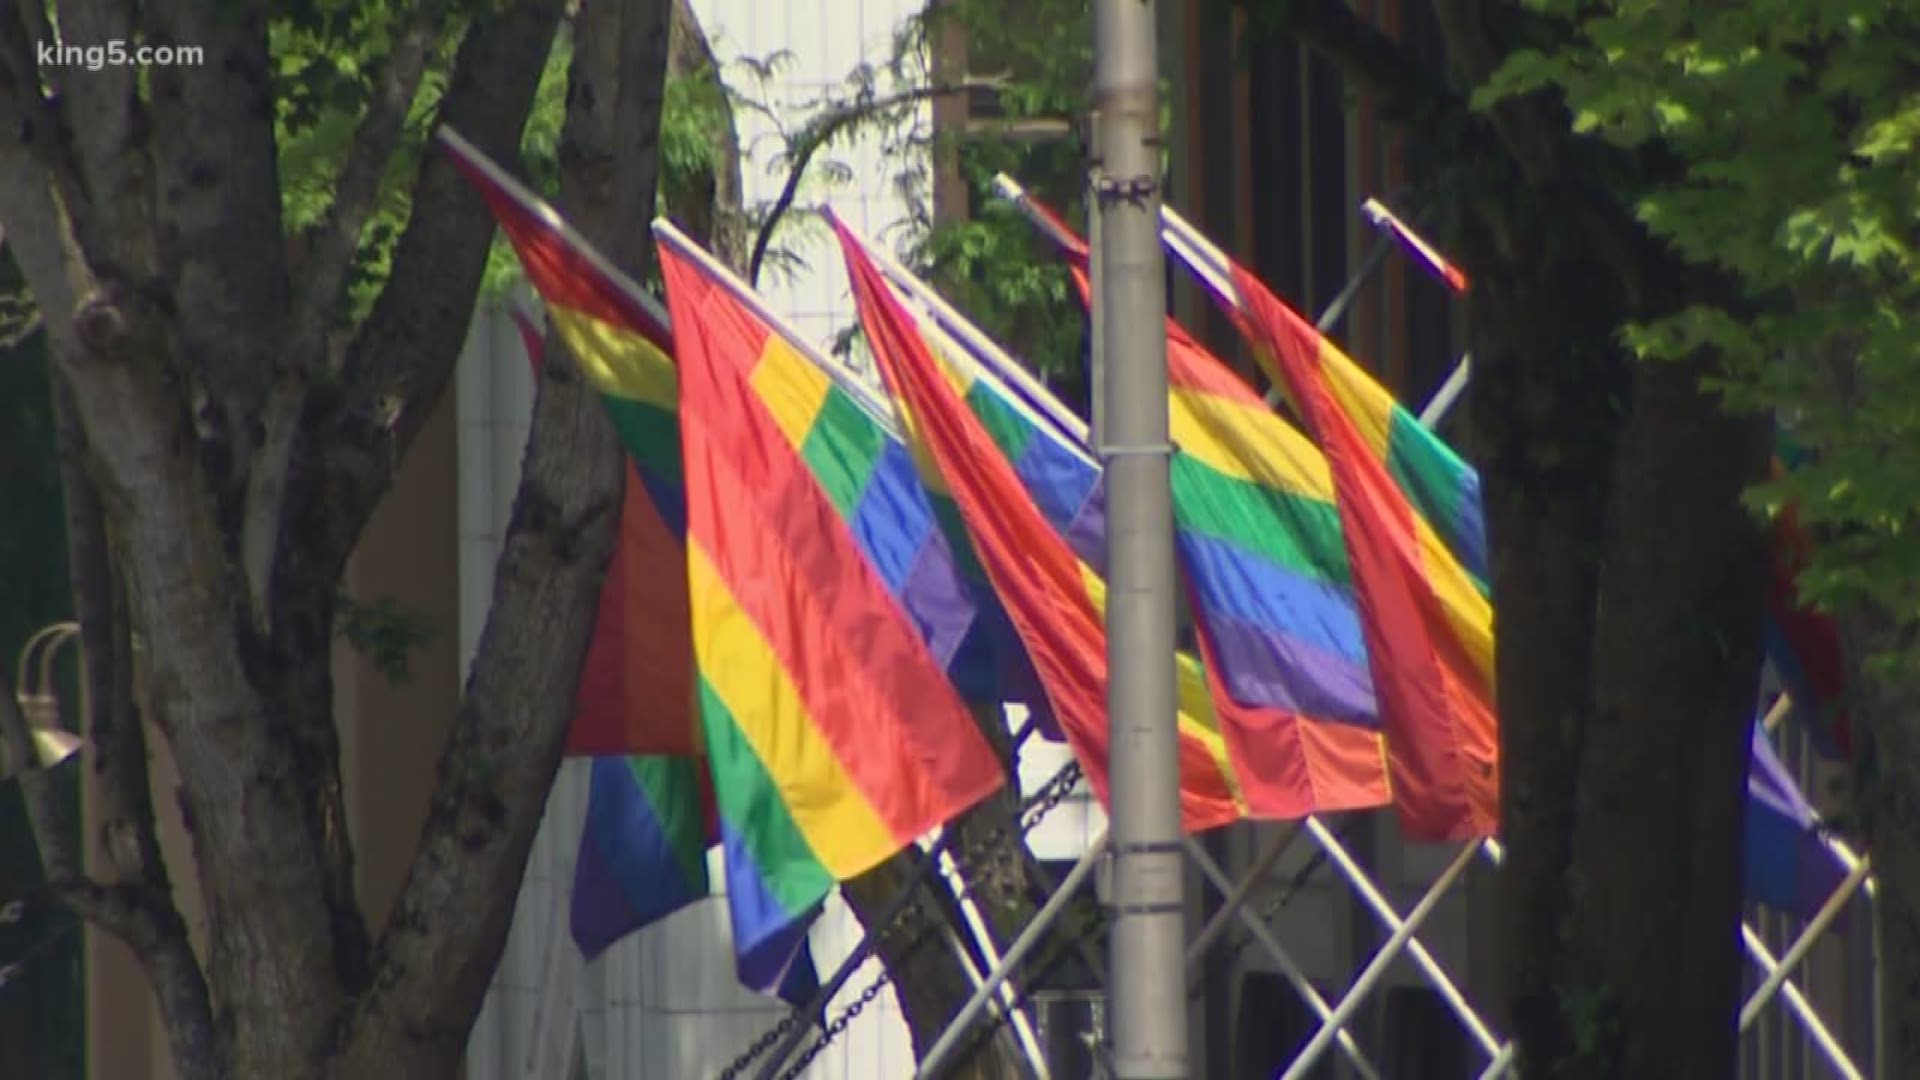 Gov. Jay Inslee raised a rainbow flag on Monday to kick off Pride Week in Olympia. KING 5's Drew Mikkelsen reports.